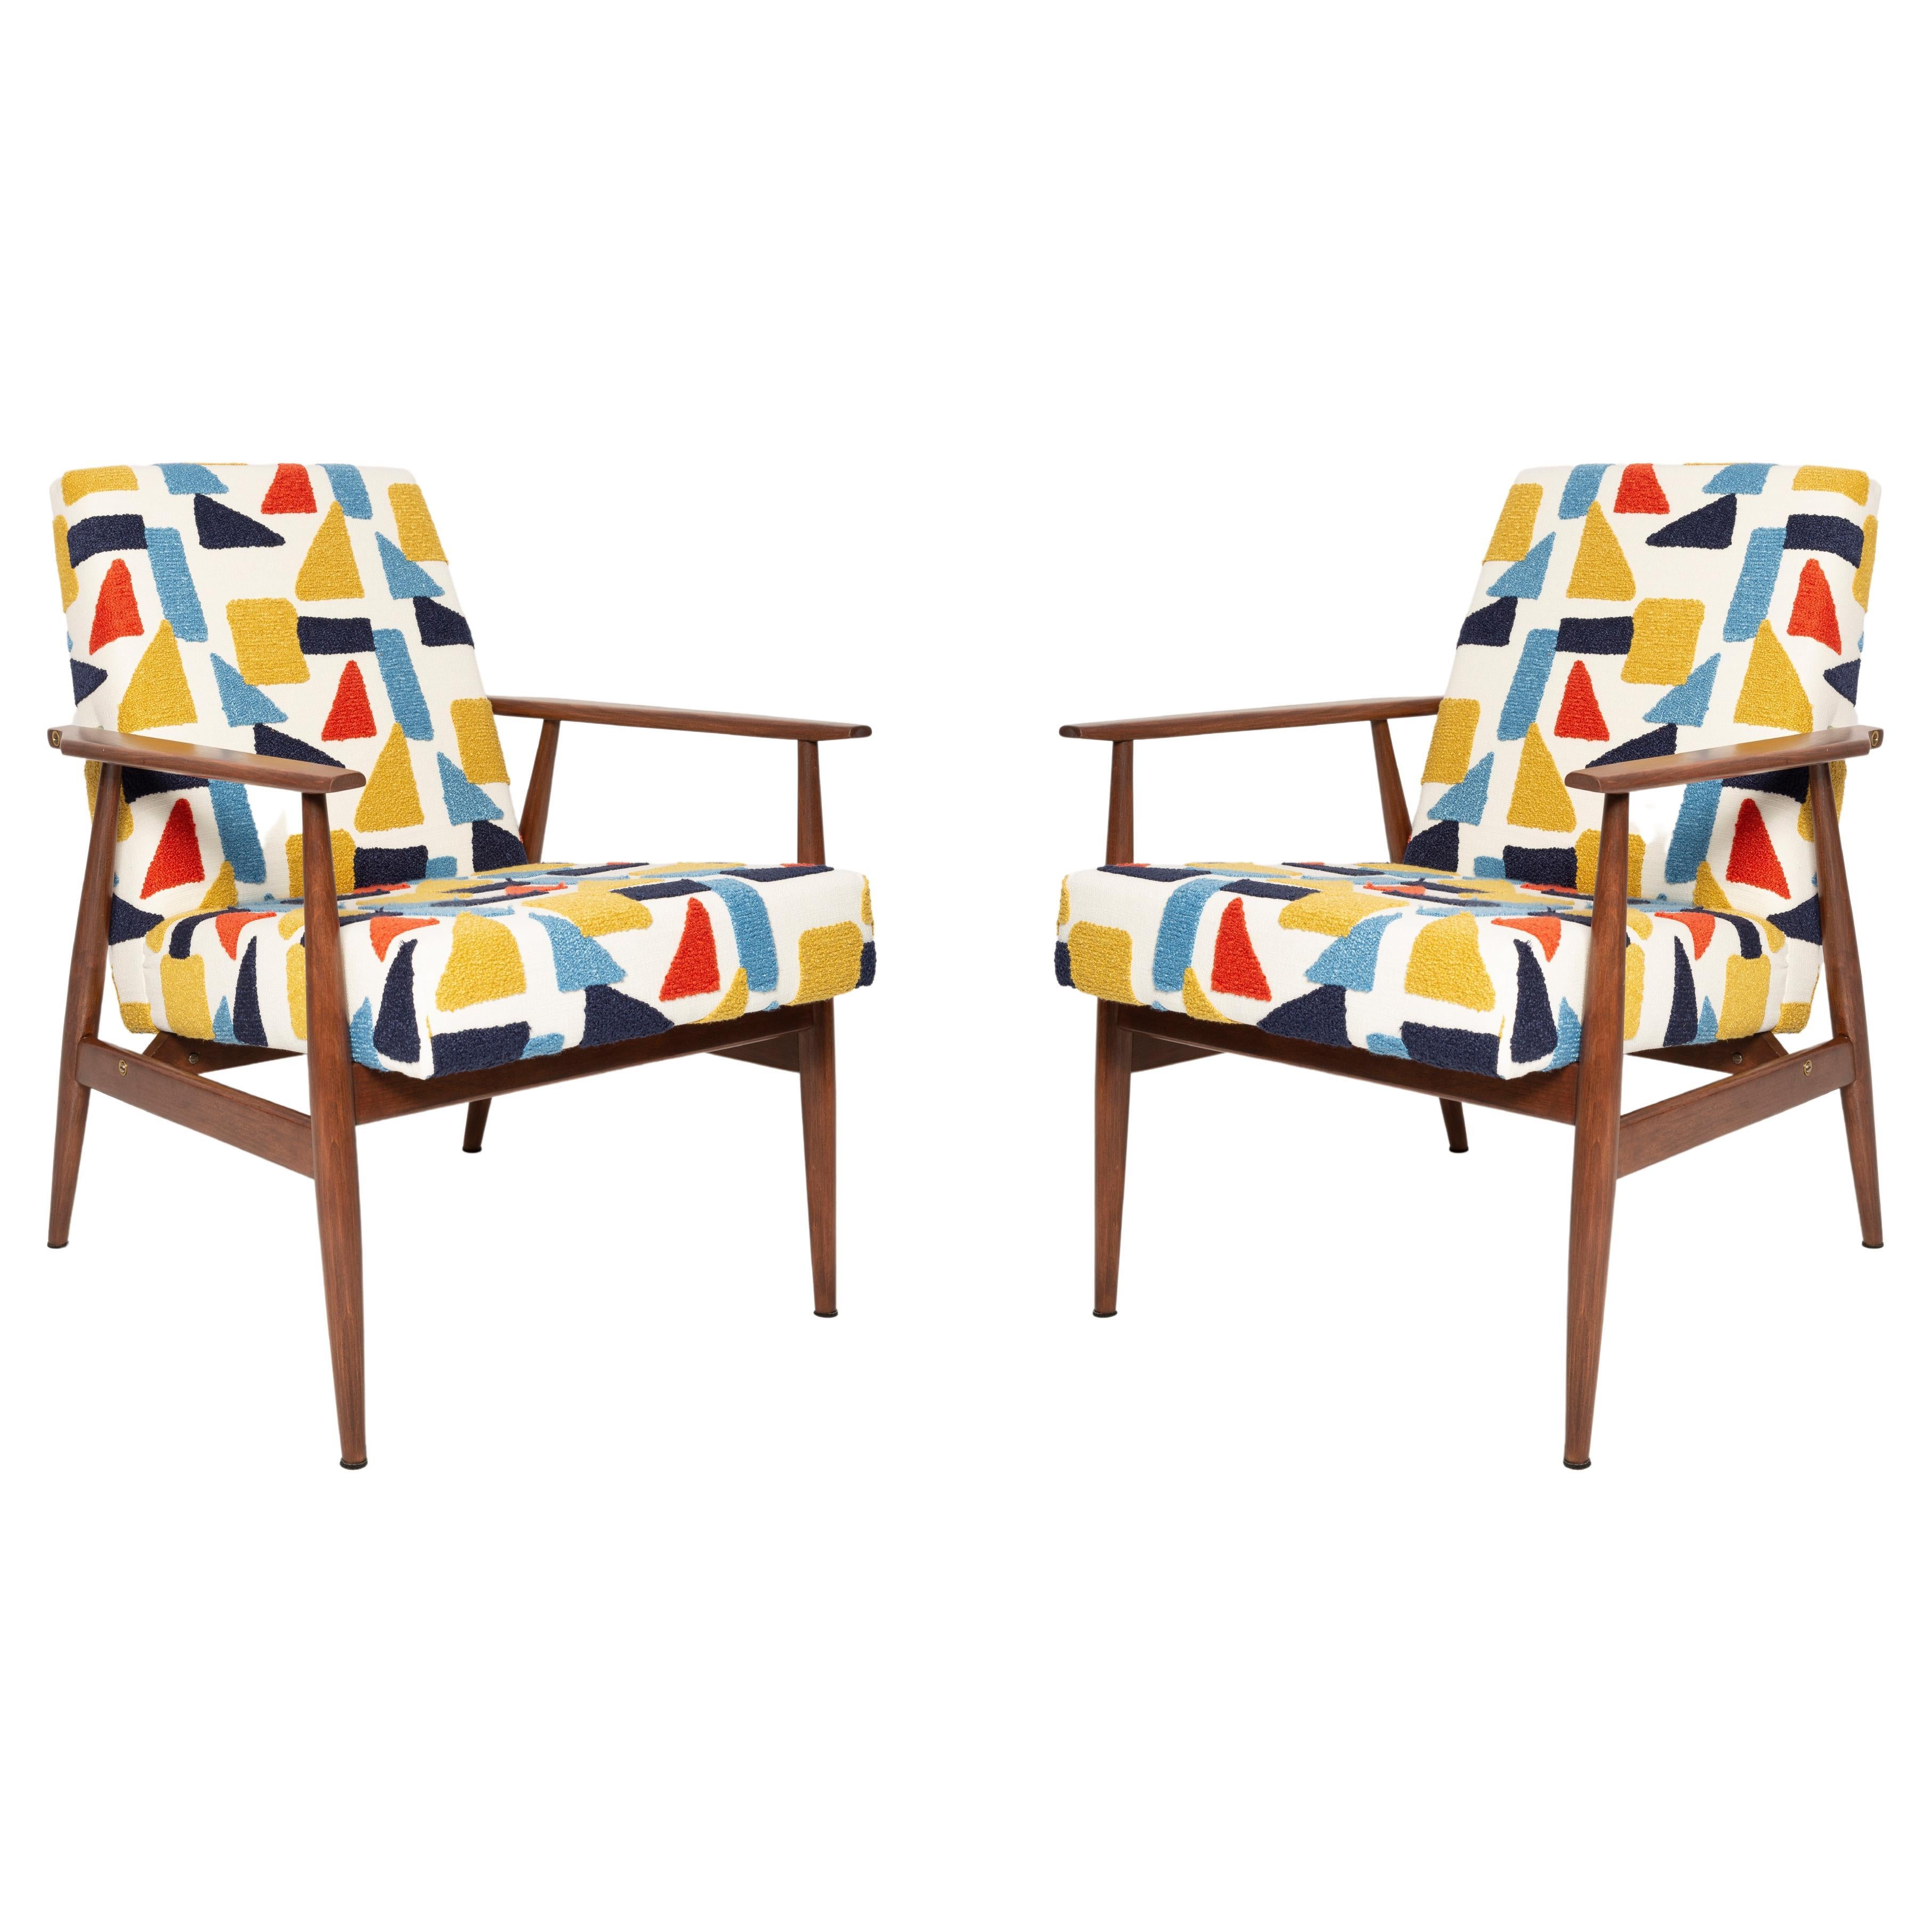 Pair of Mid-Century Pop Art White Boucle Armchairs, H. Lis, Poland, 1960s For Sale